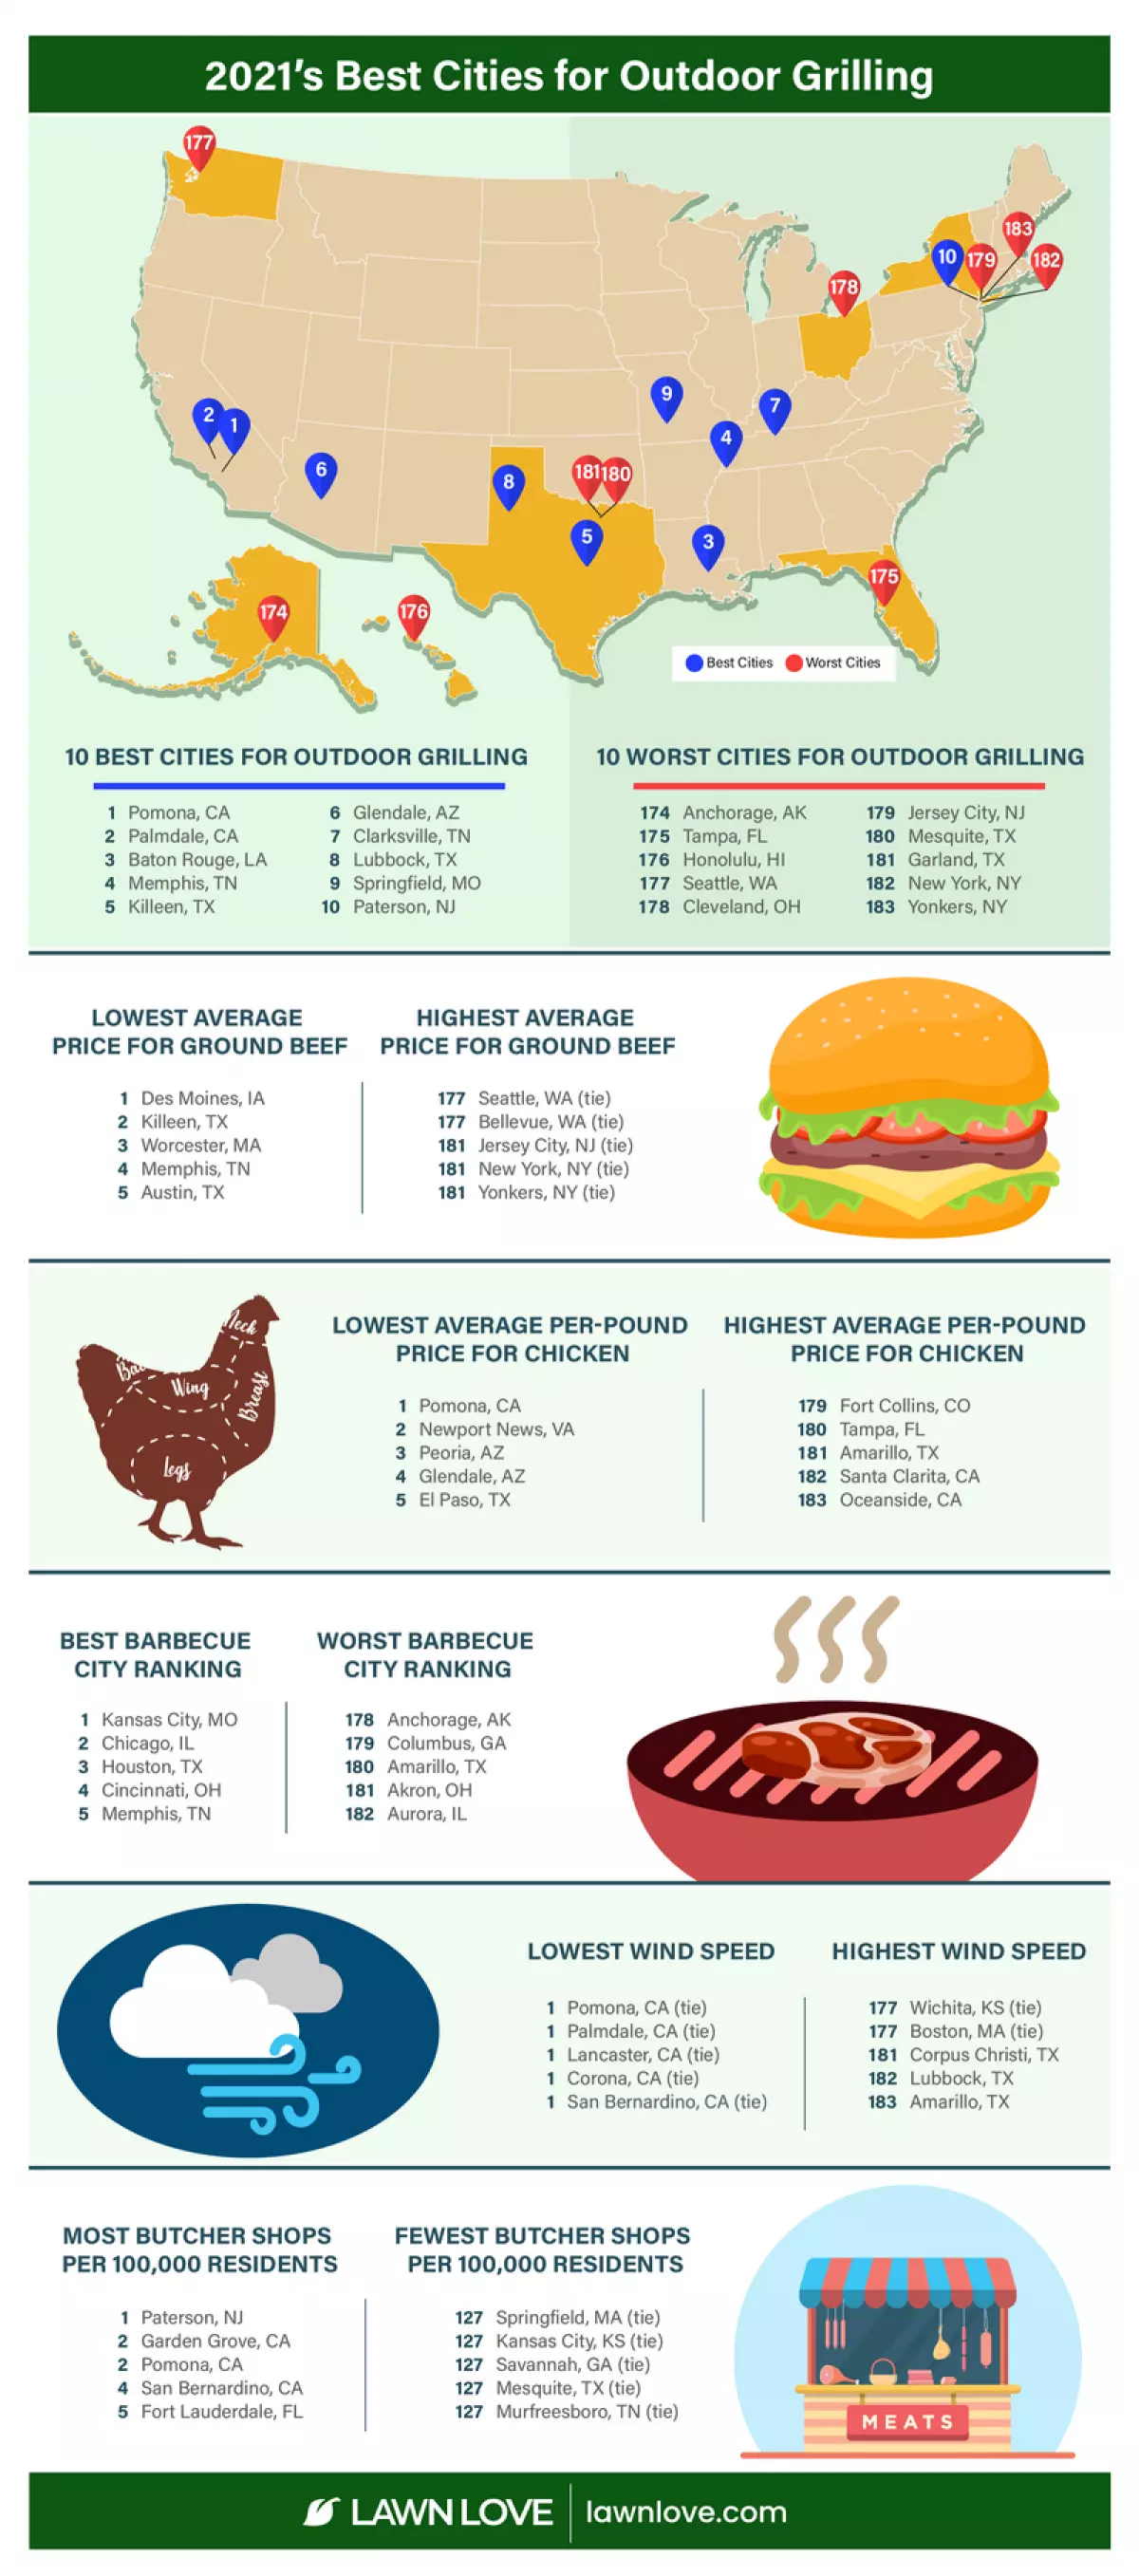 Infographic showing the best cities for outdoor grilling